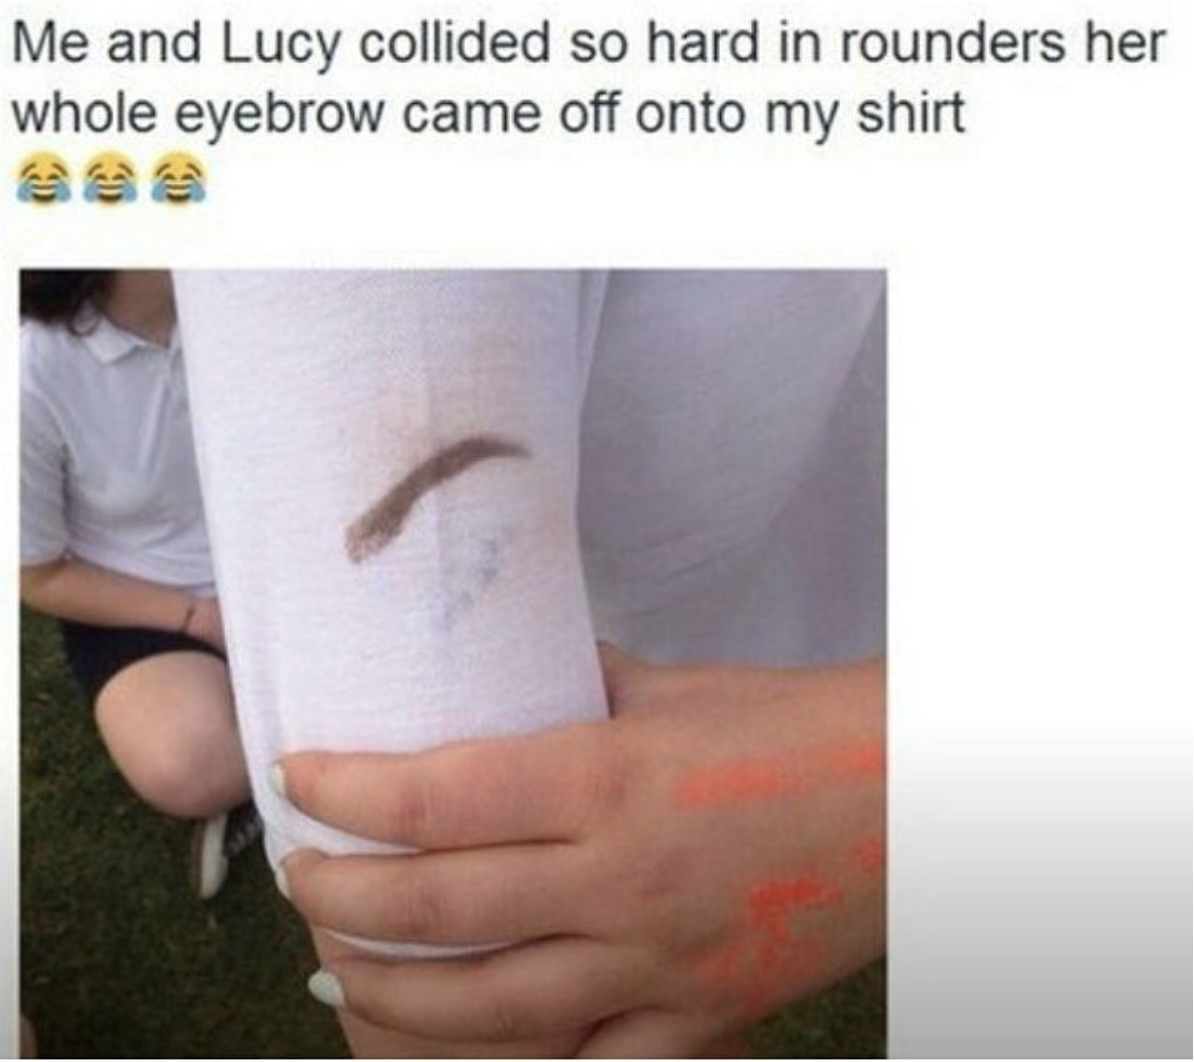 funny picture made into a meme of an eyebrow that came off and stuck to another player's shirt